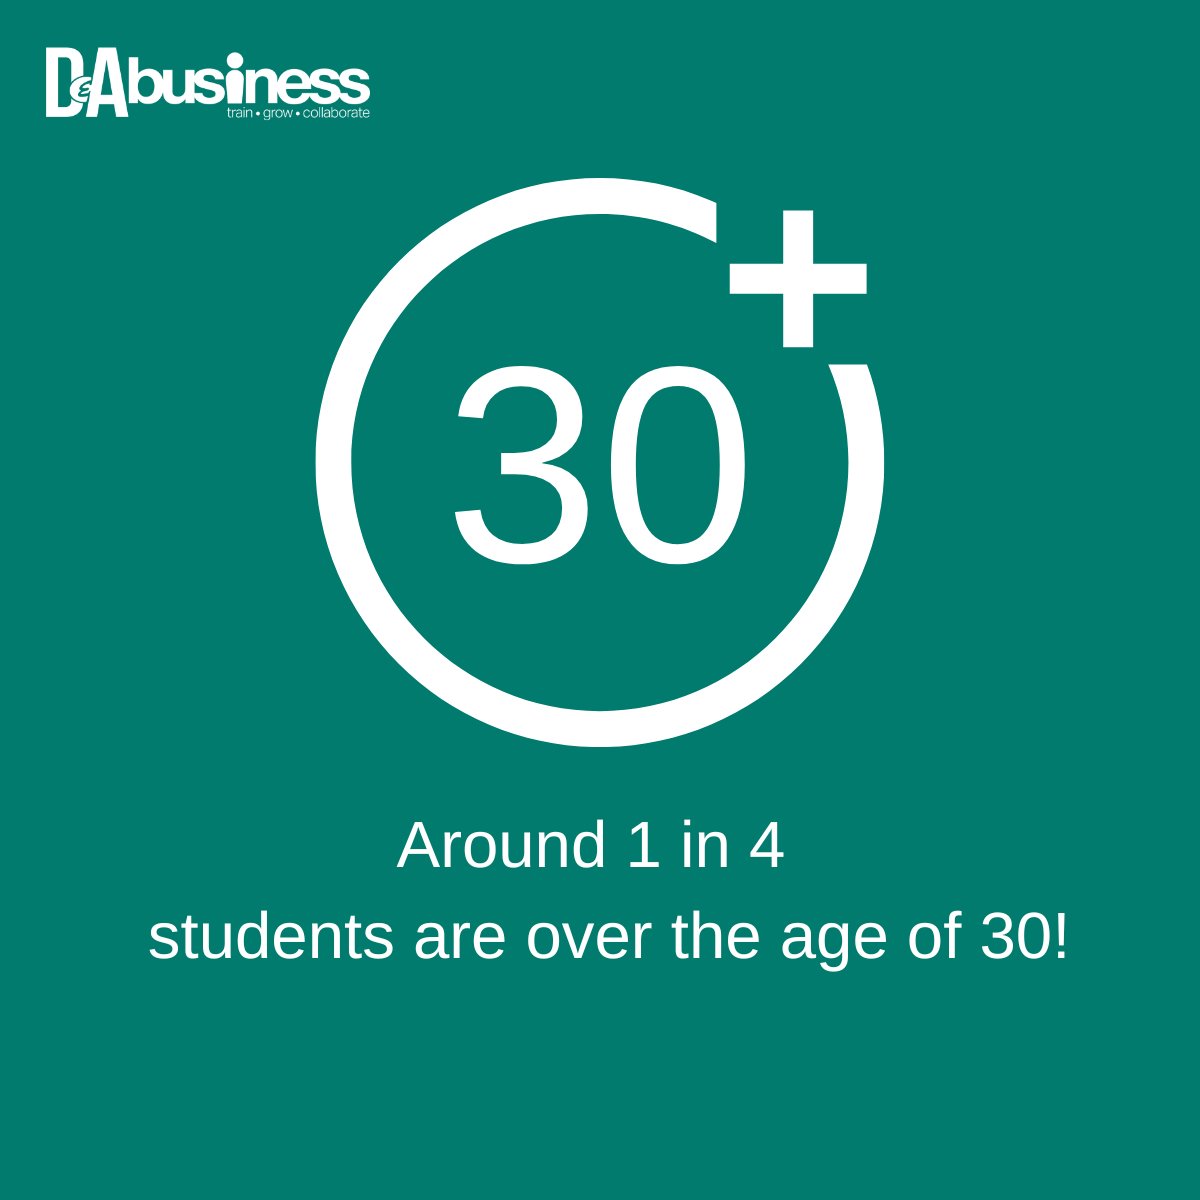 It is never too late to become a student! ⏲️ At @dundee_angus, we have a variety of courses to suit all age ranges. In fact, around 1 in 4 of our students are over the age of 30. Find out more today 👇 pulse.ly/ia635zsuxc #upskilling #businesstraining #DABusiness